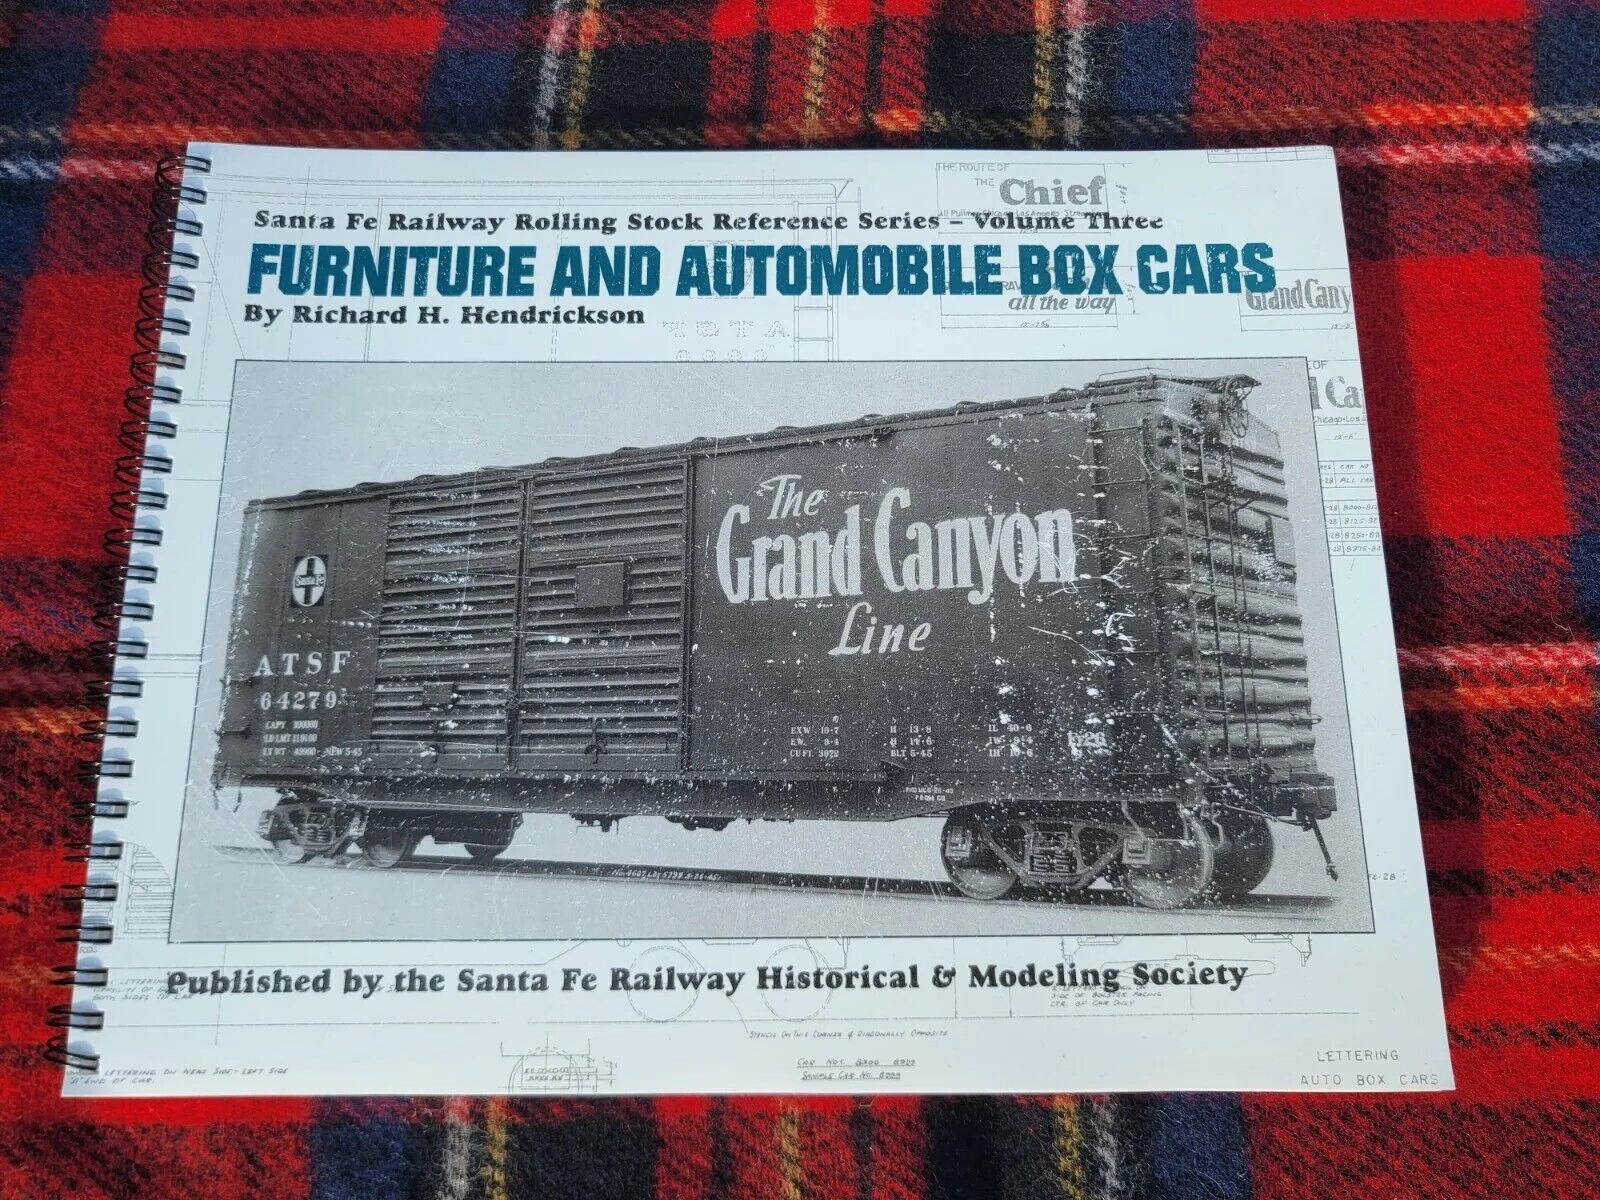 SANTA FE RAILWAYS REFERENCE SERIES FURNITURE AND AUTOMOBILE BOX CARS VOL 3